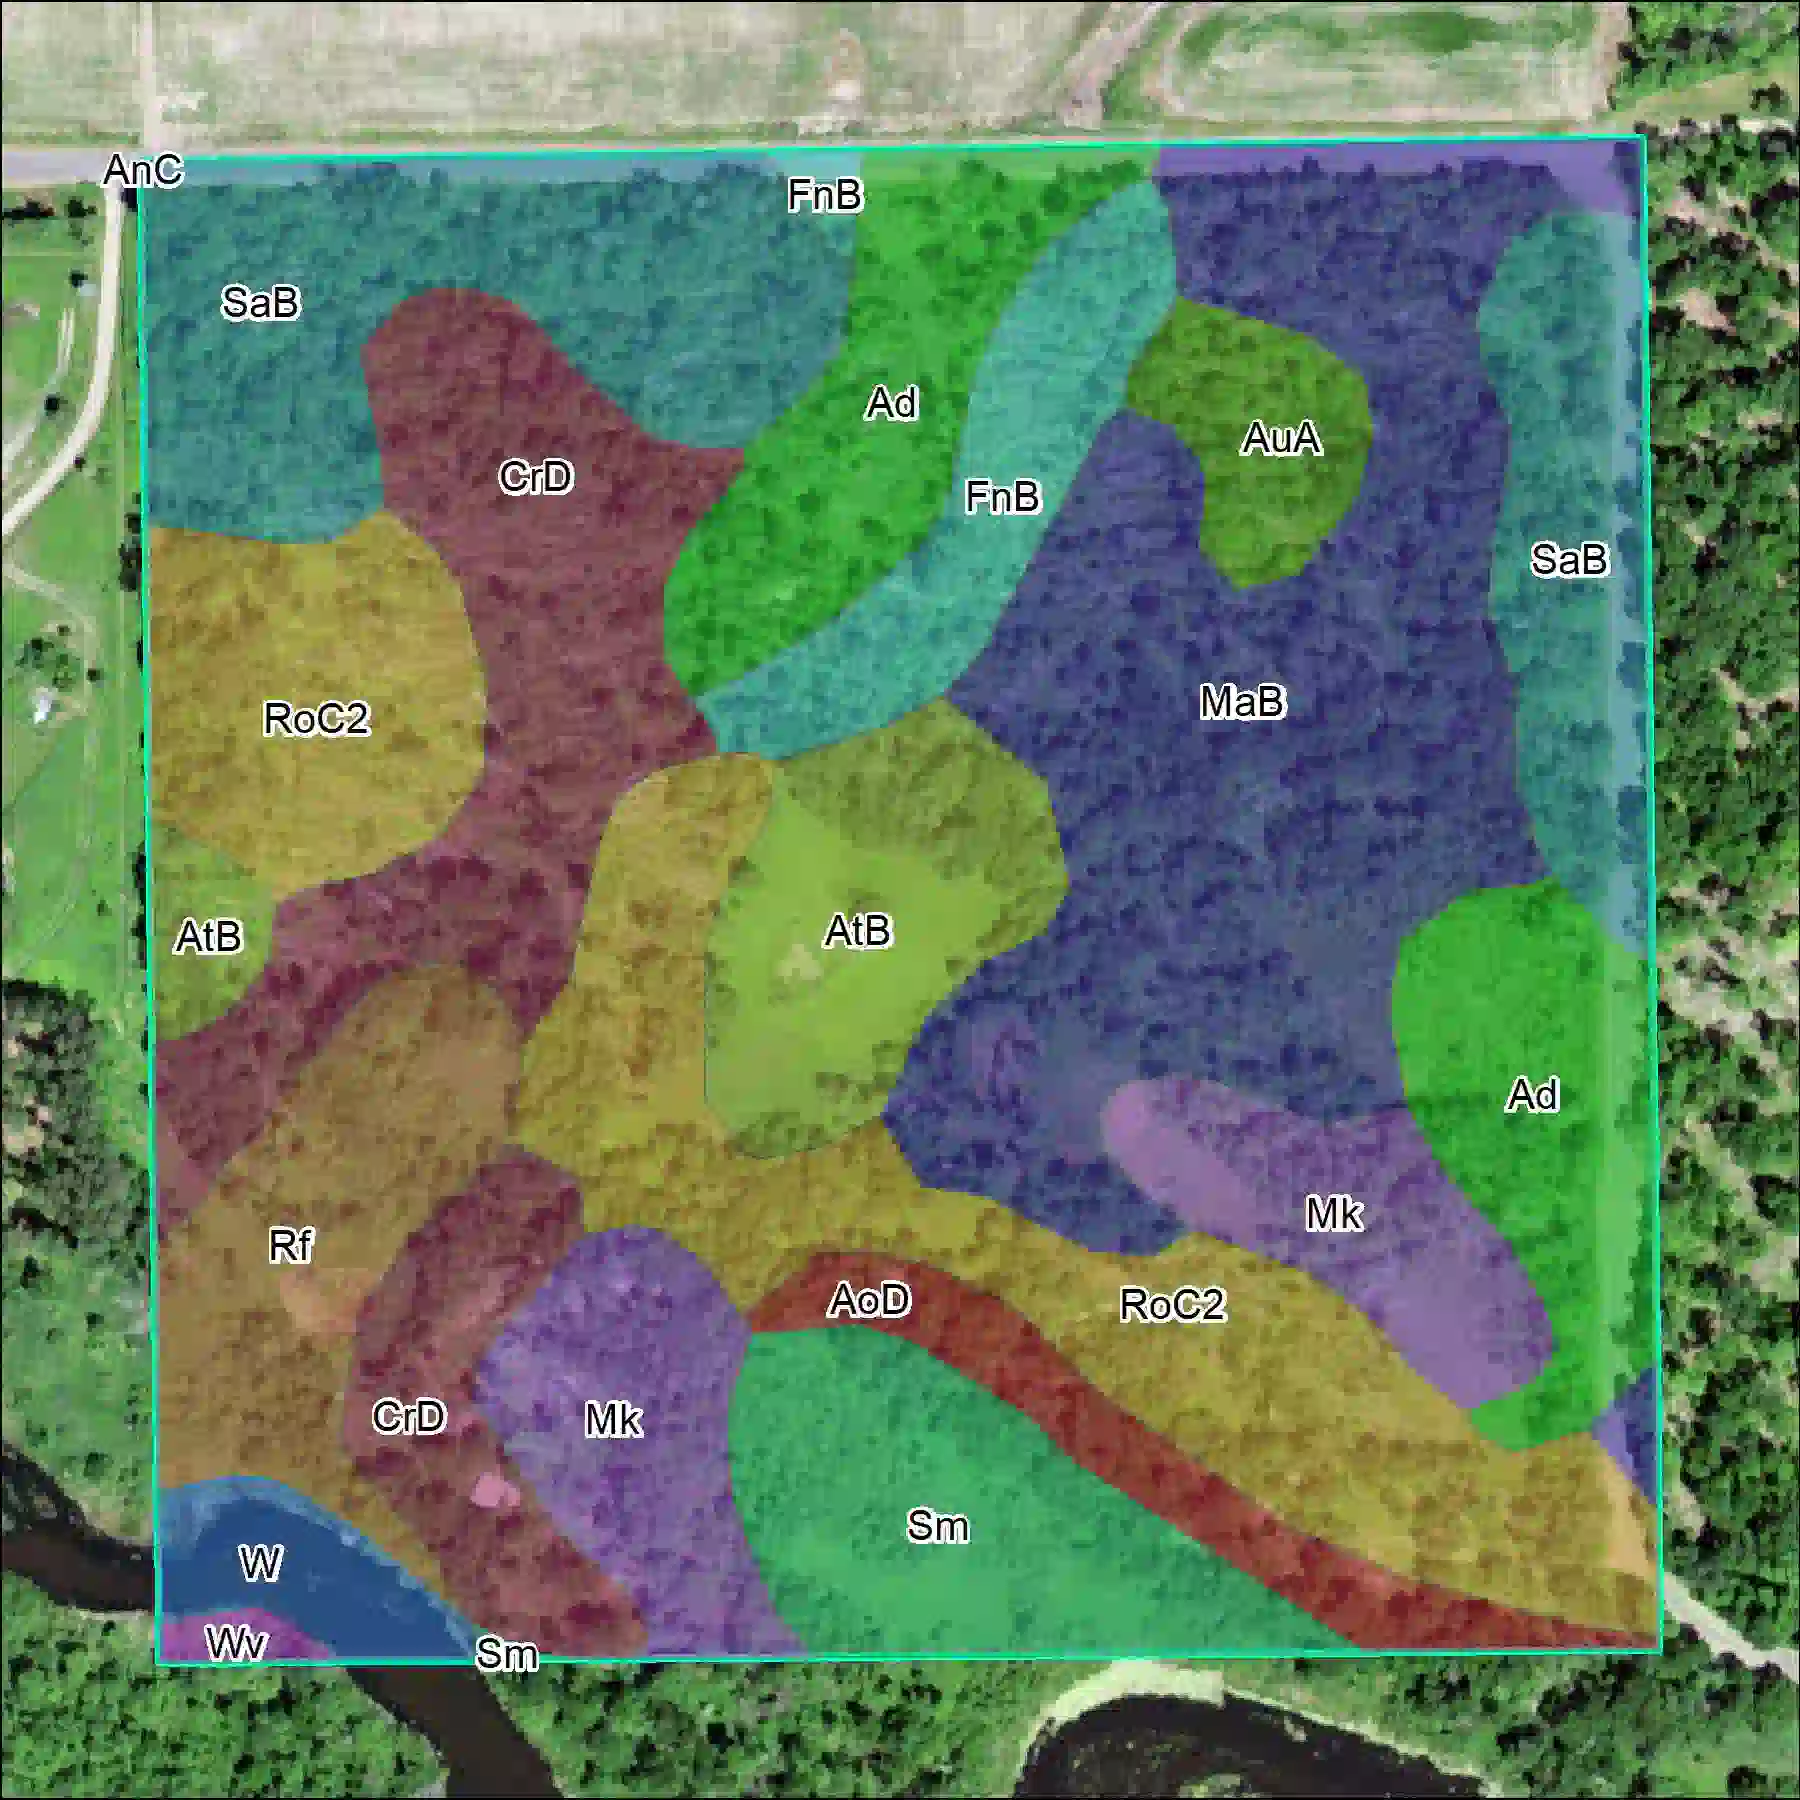 Soils polygons acquired from the Web Soil Survey symbolized with each polygon having a different color and labeled with their map unit key.